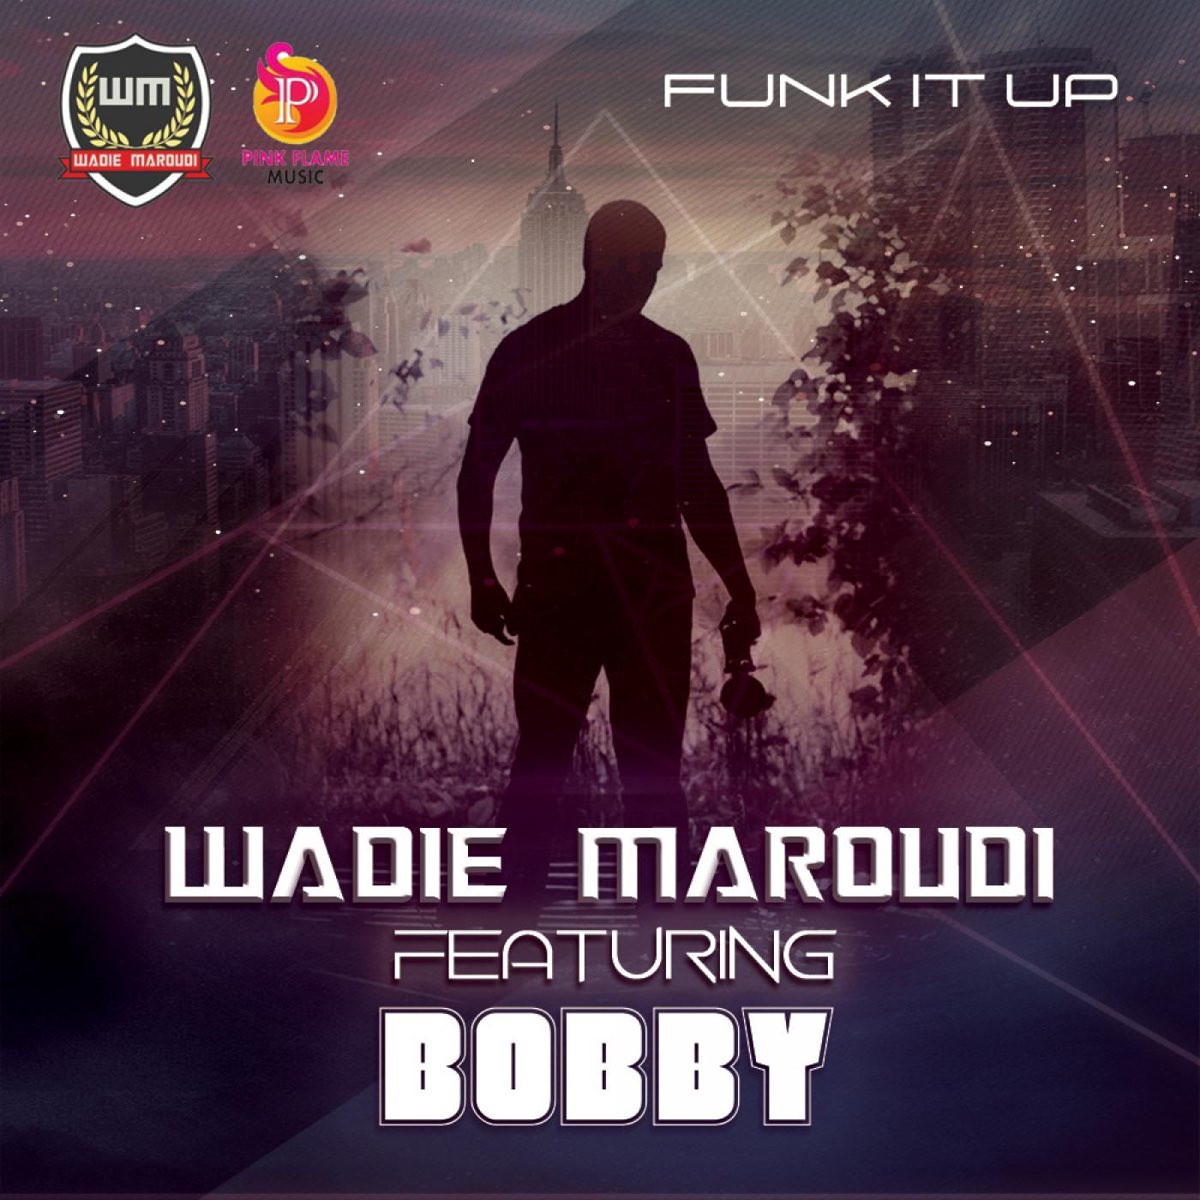 Feat bobby. Bobby Funk. Funk it up. Up 2 me Music.